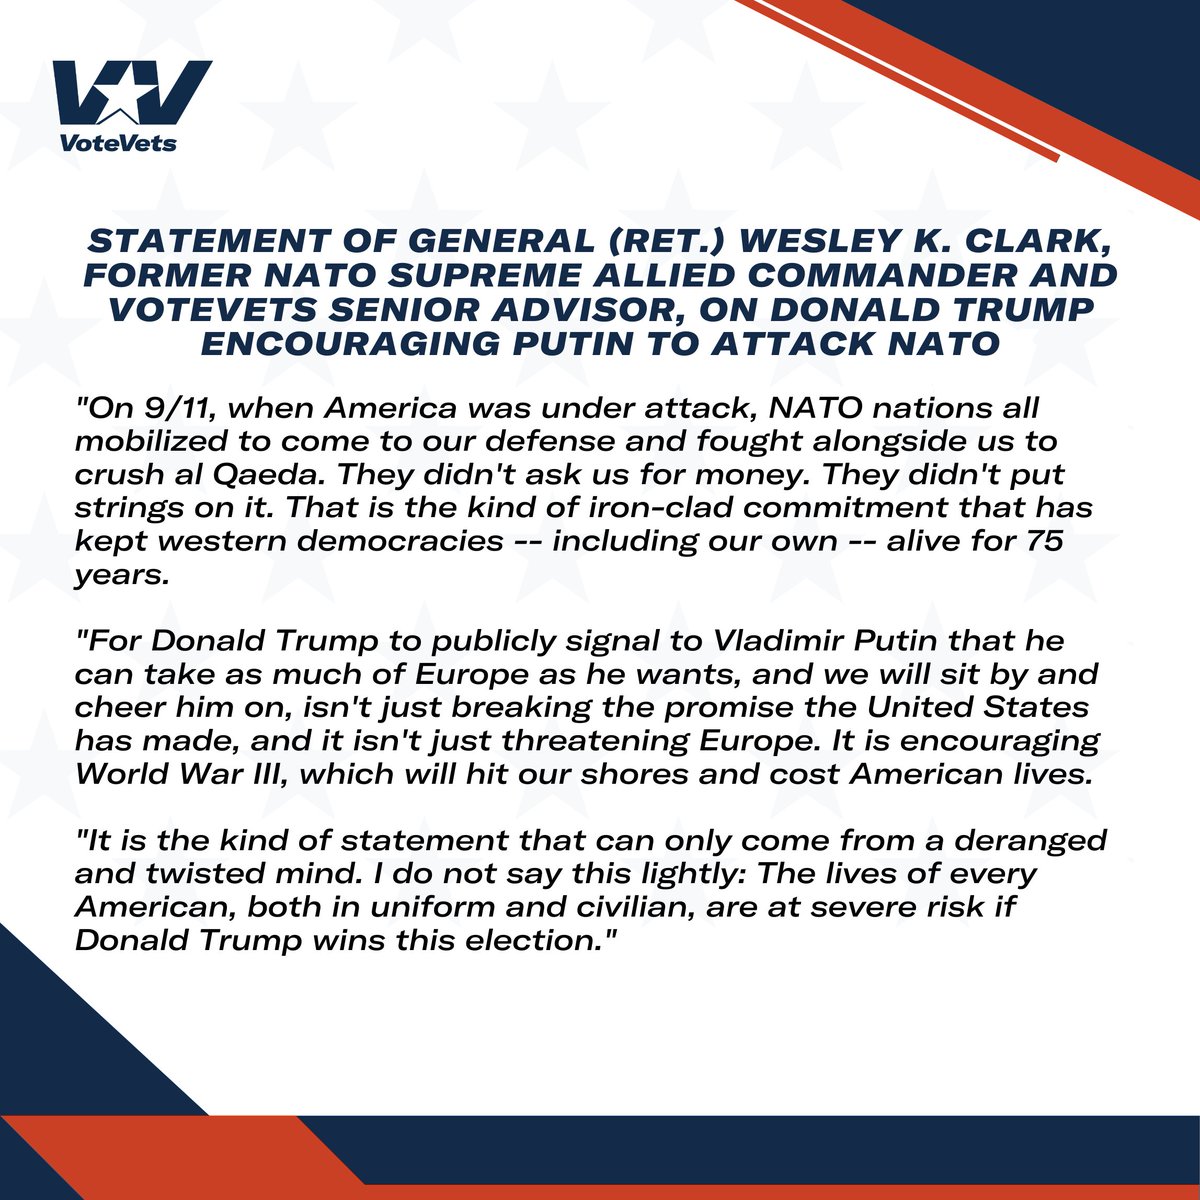 NEW: Statement Of General (Ret.) Wesley K. Clark, Former NATO Supreme Allied Commander And VoteVets Senior Advisor, On Donald Trump Encouraging Putin To Attack NATO 'It is the kind of statement that can only come from a deranged and twisted mind. I do not say this lightly: The…